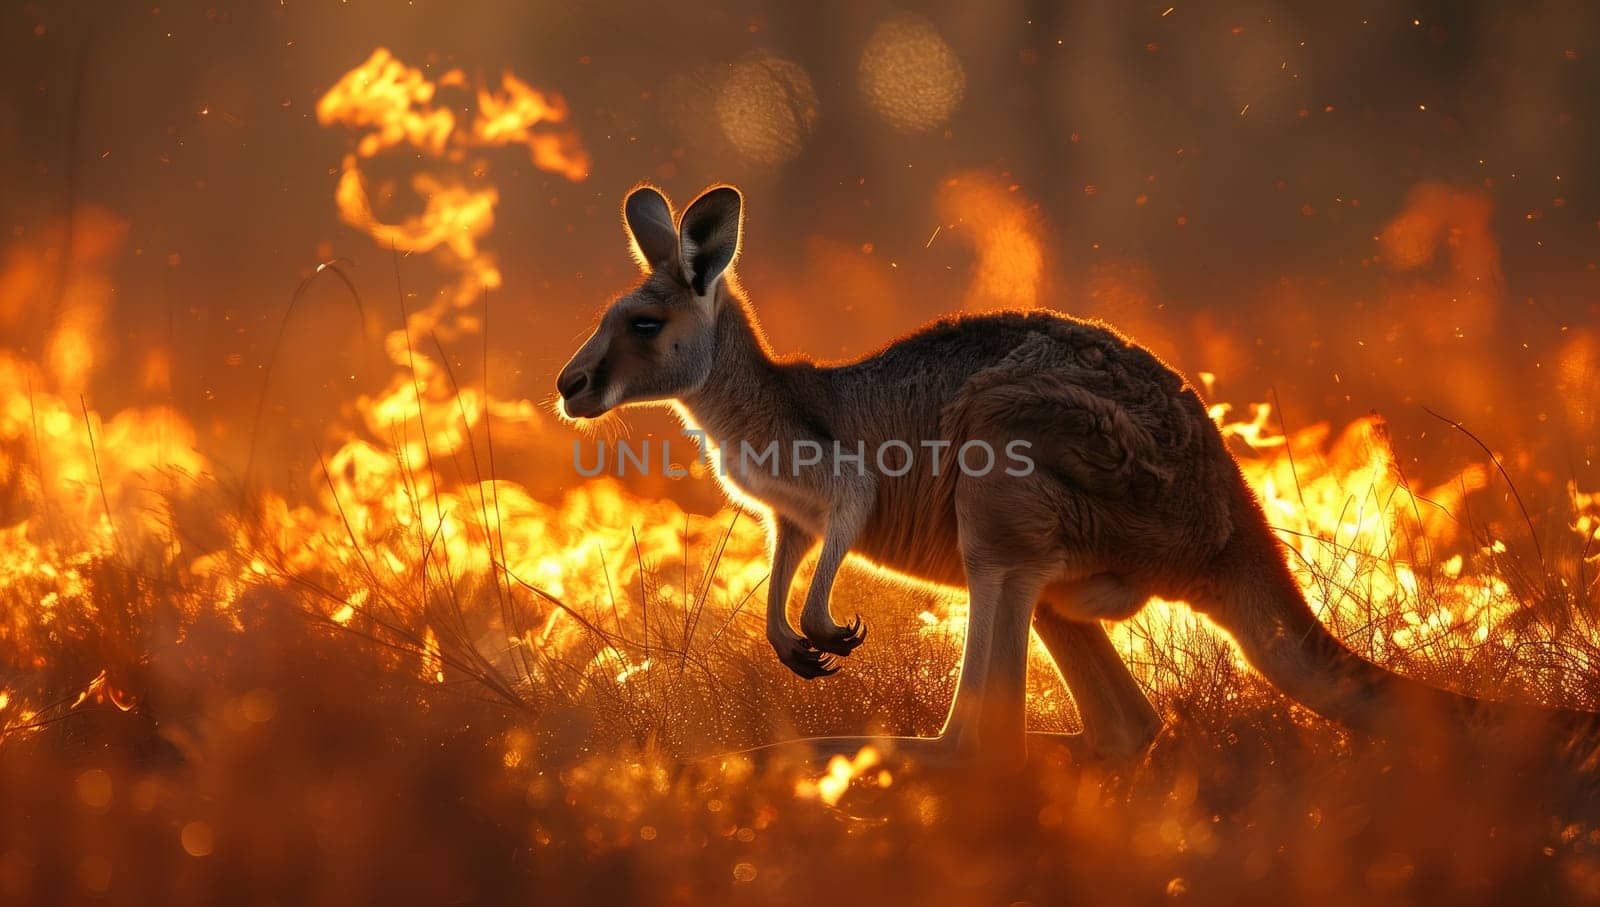 A fawn kangaroo, a terrestrial animal with a long tail and snout, is racing through a grassland consumed by fire. The event is a tragic display of darkness in the marsupials natural landscape